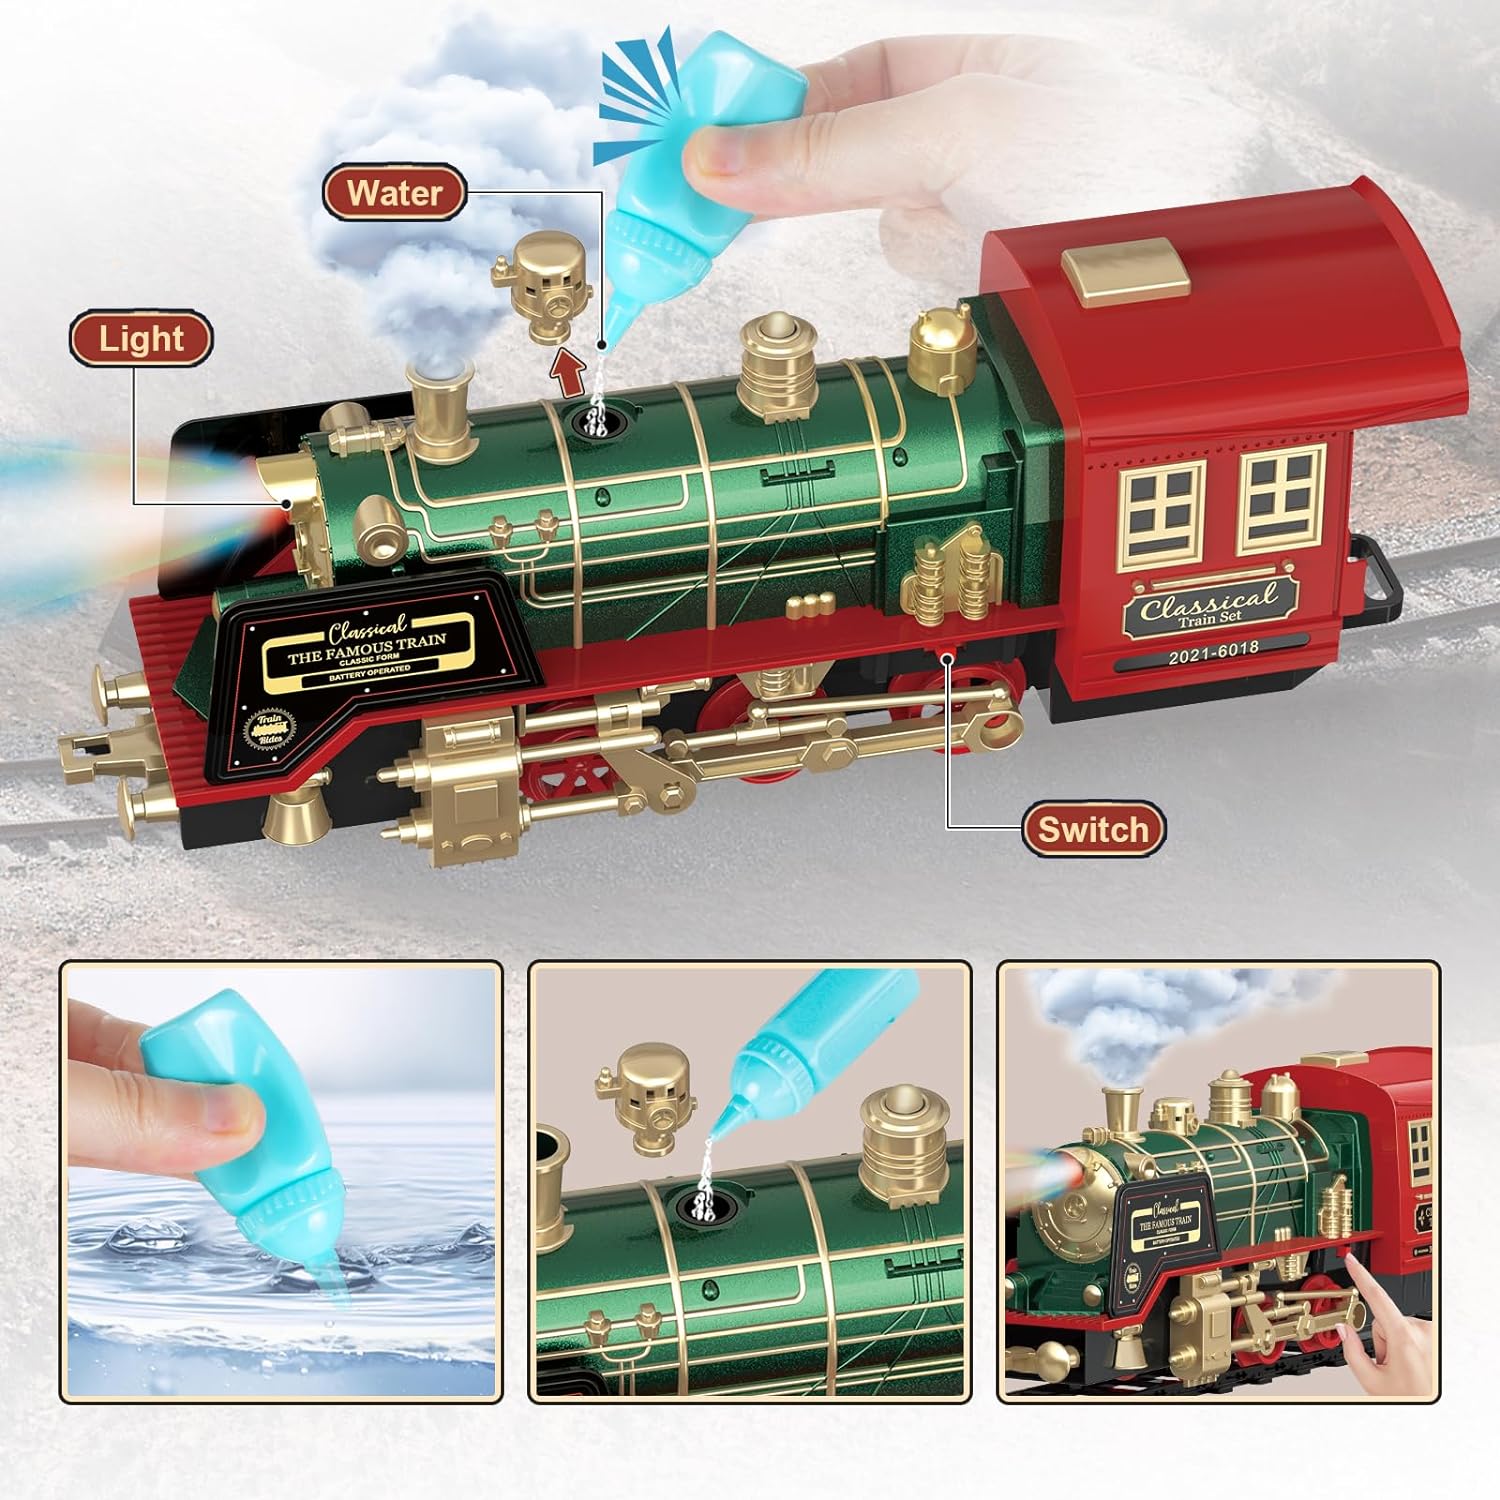 Kids Train Set - Remote Control Train Toys w/Smoke, Sounds (Turn on/Off), Lights, Rechargeable Electric Train - Cykapu